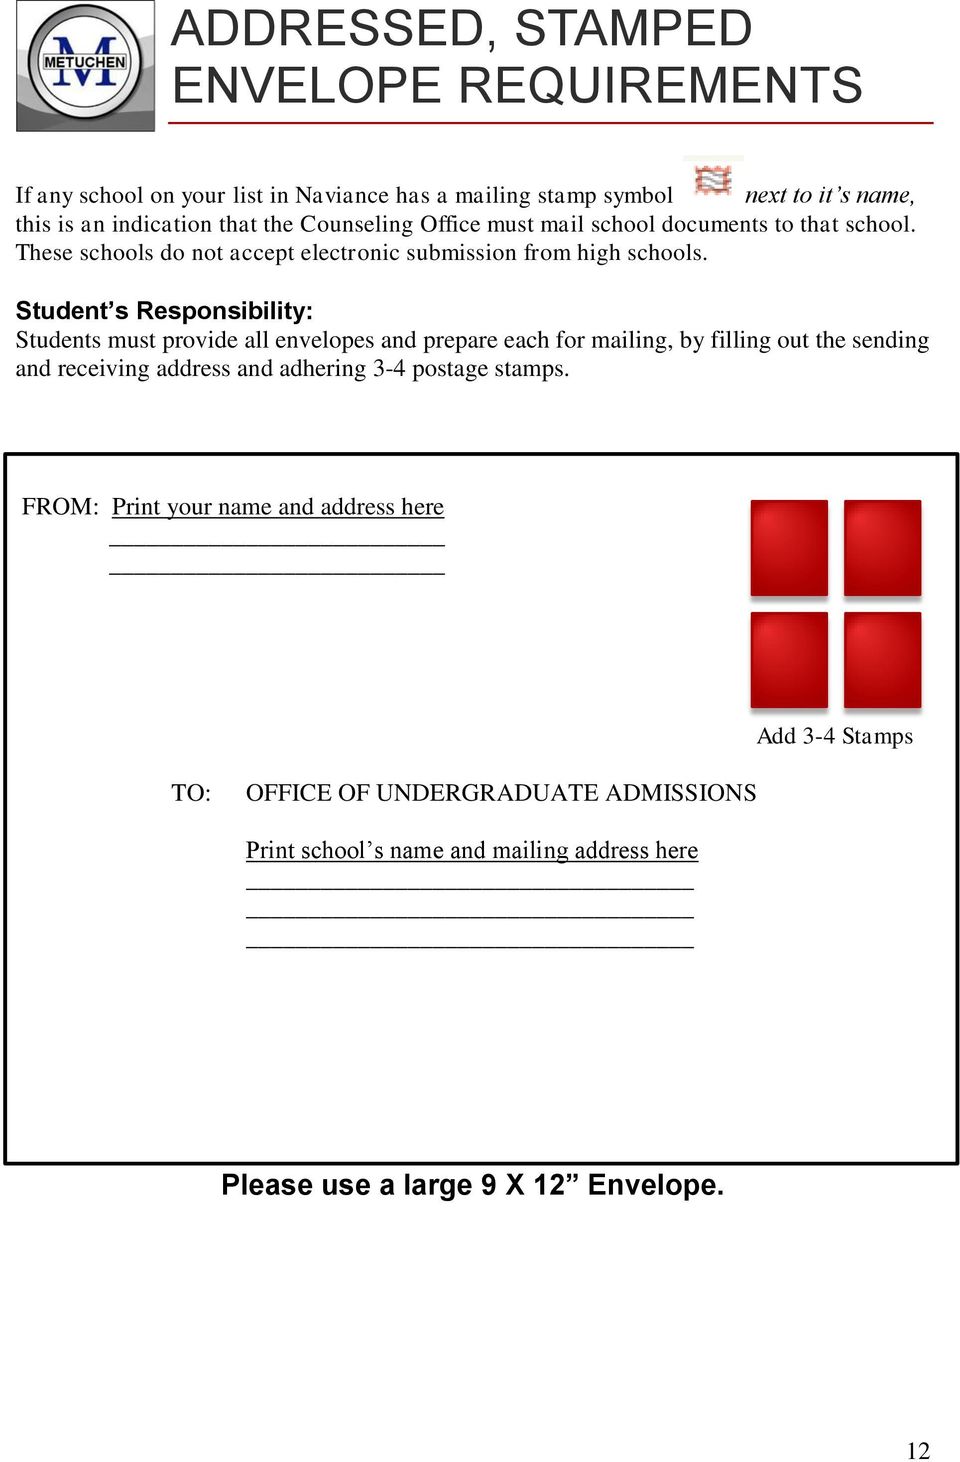 Student s Responsibility: Students must provide all envelopes and prepare each for mailing, by filling out the sending and receiving address and adhering 3-4